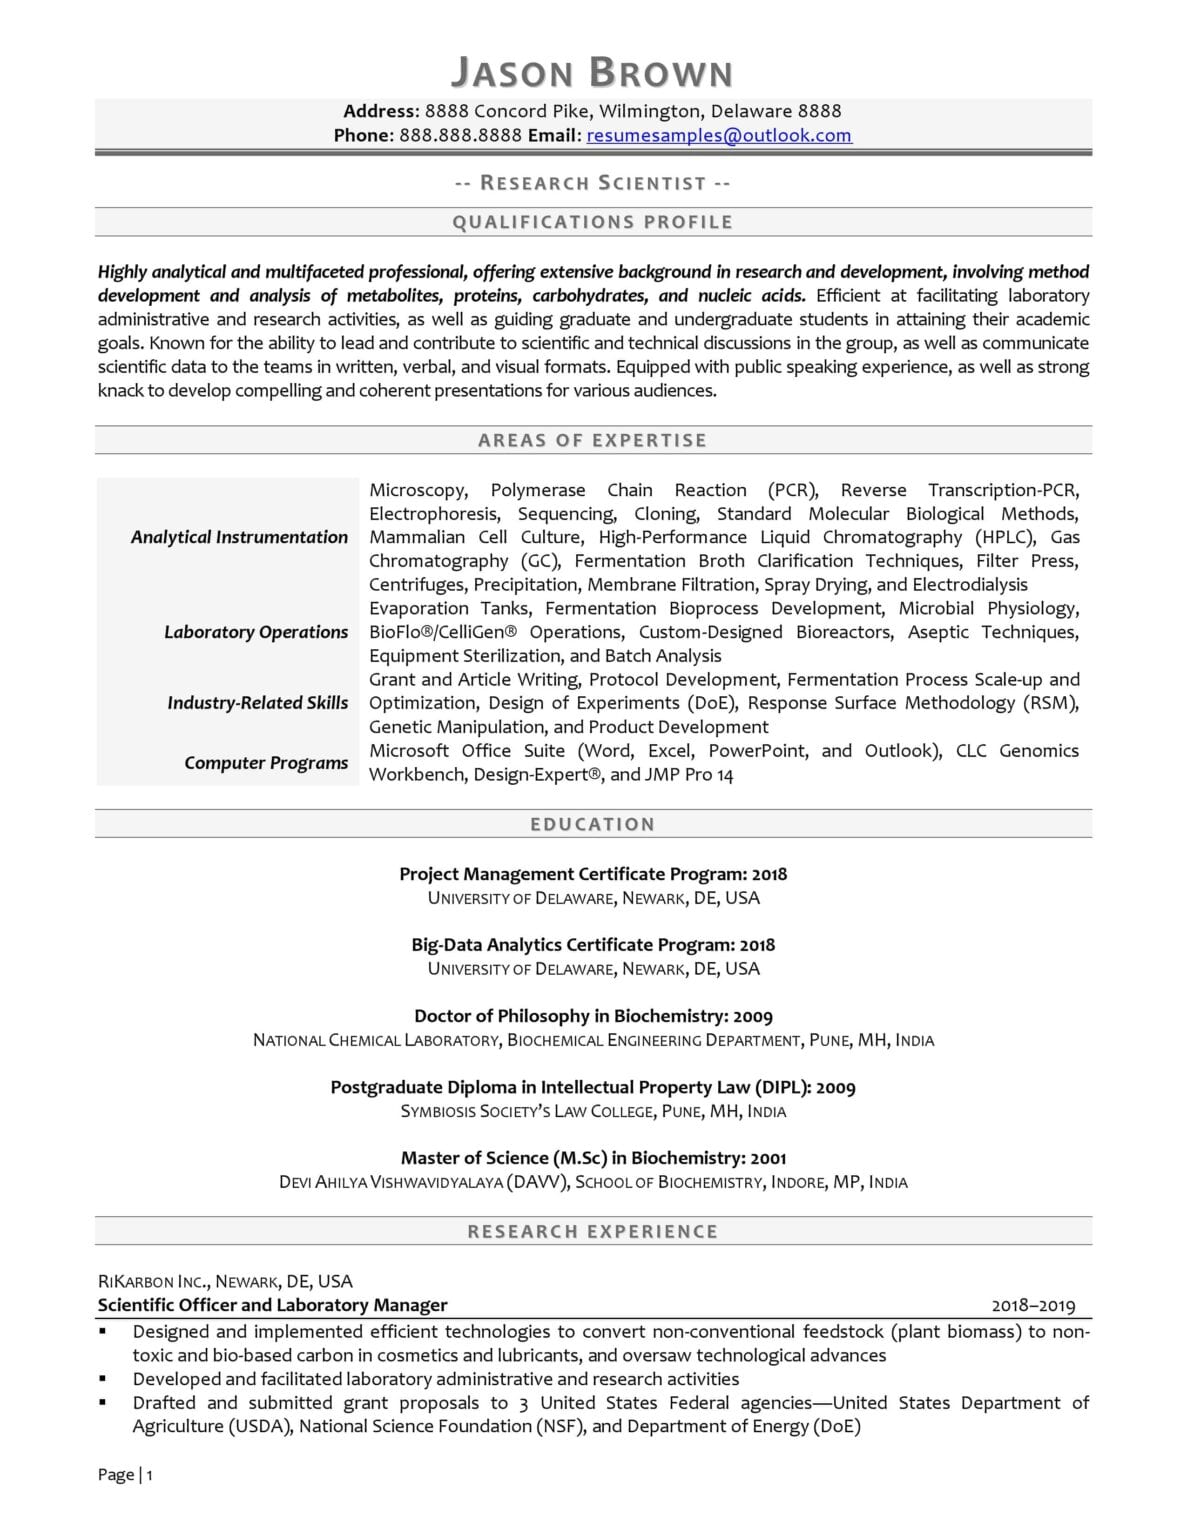 research position on resume